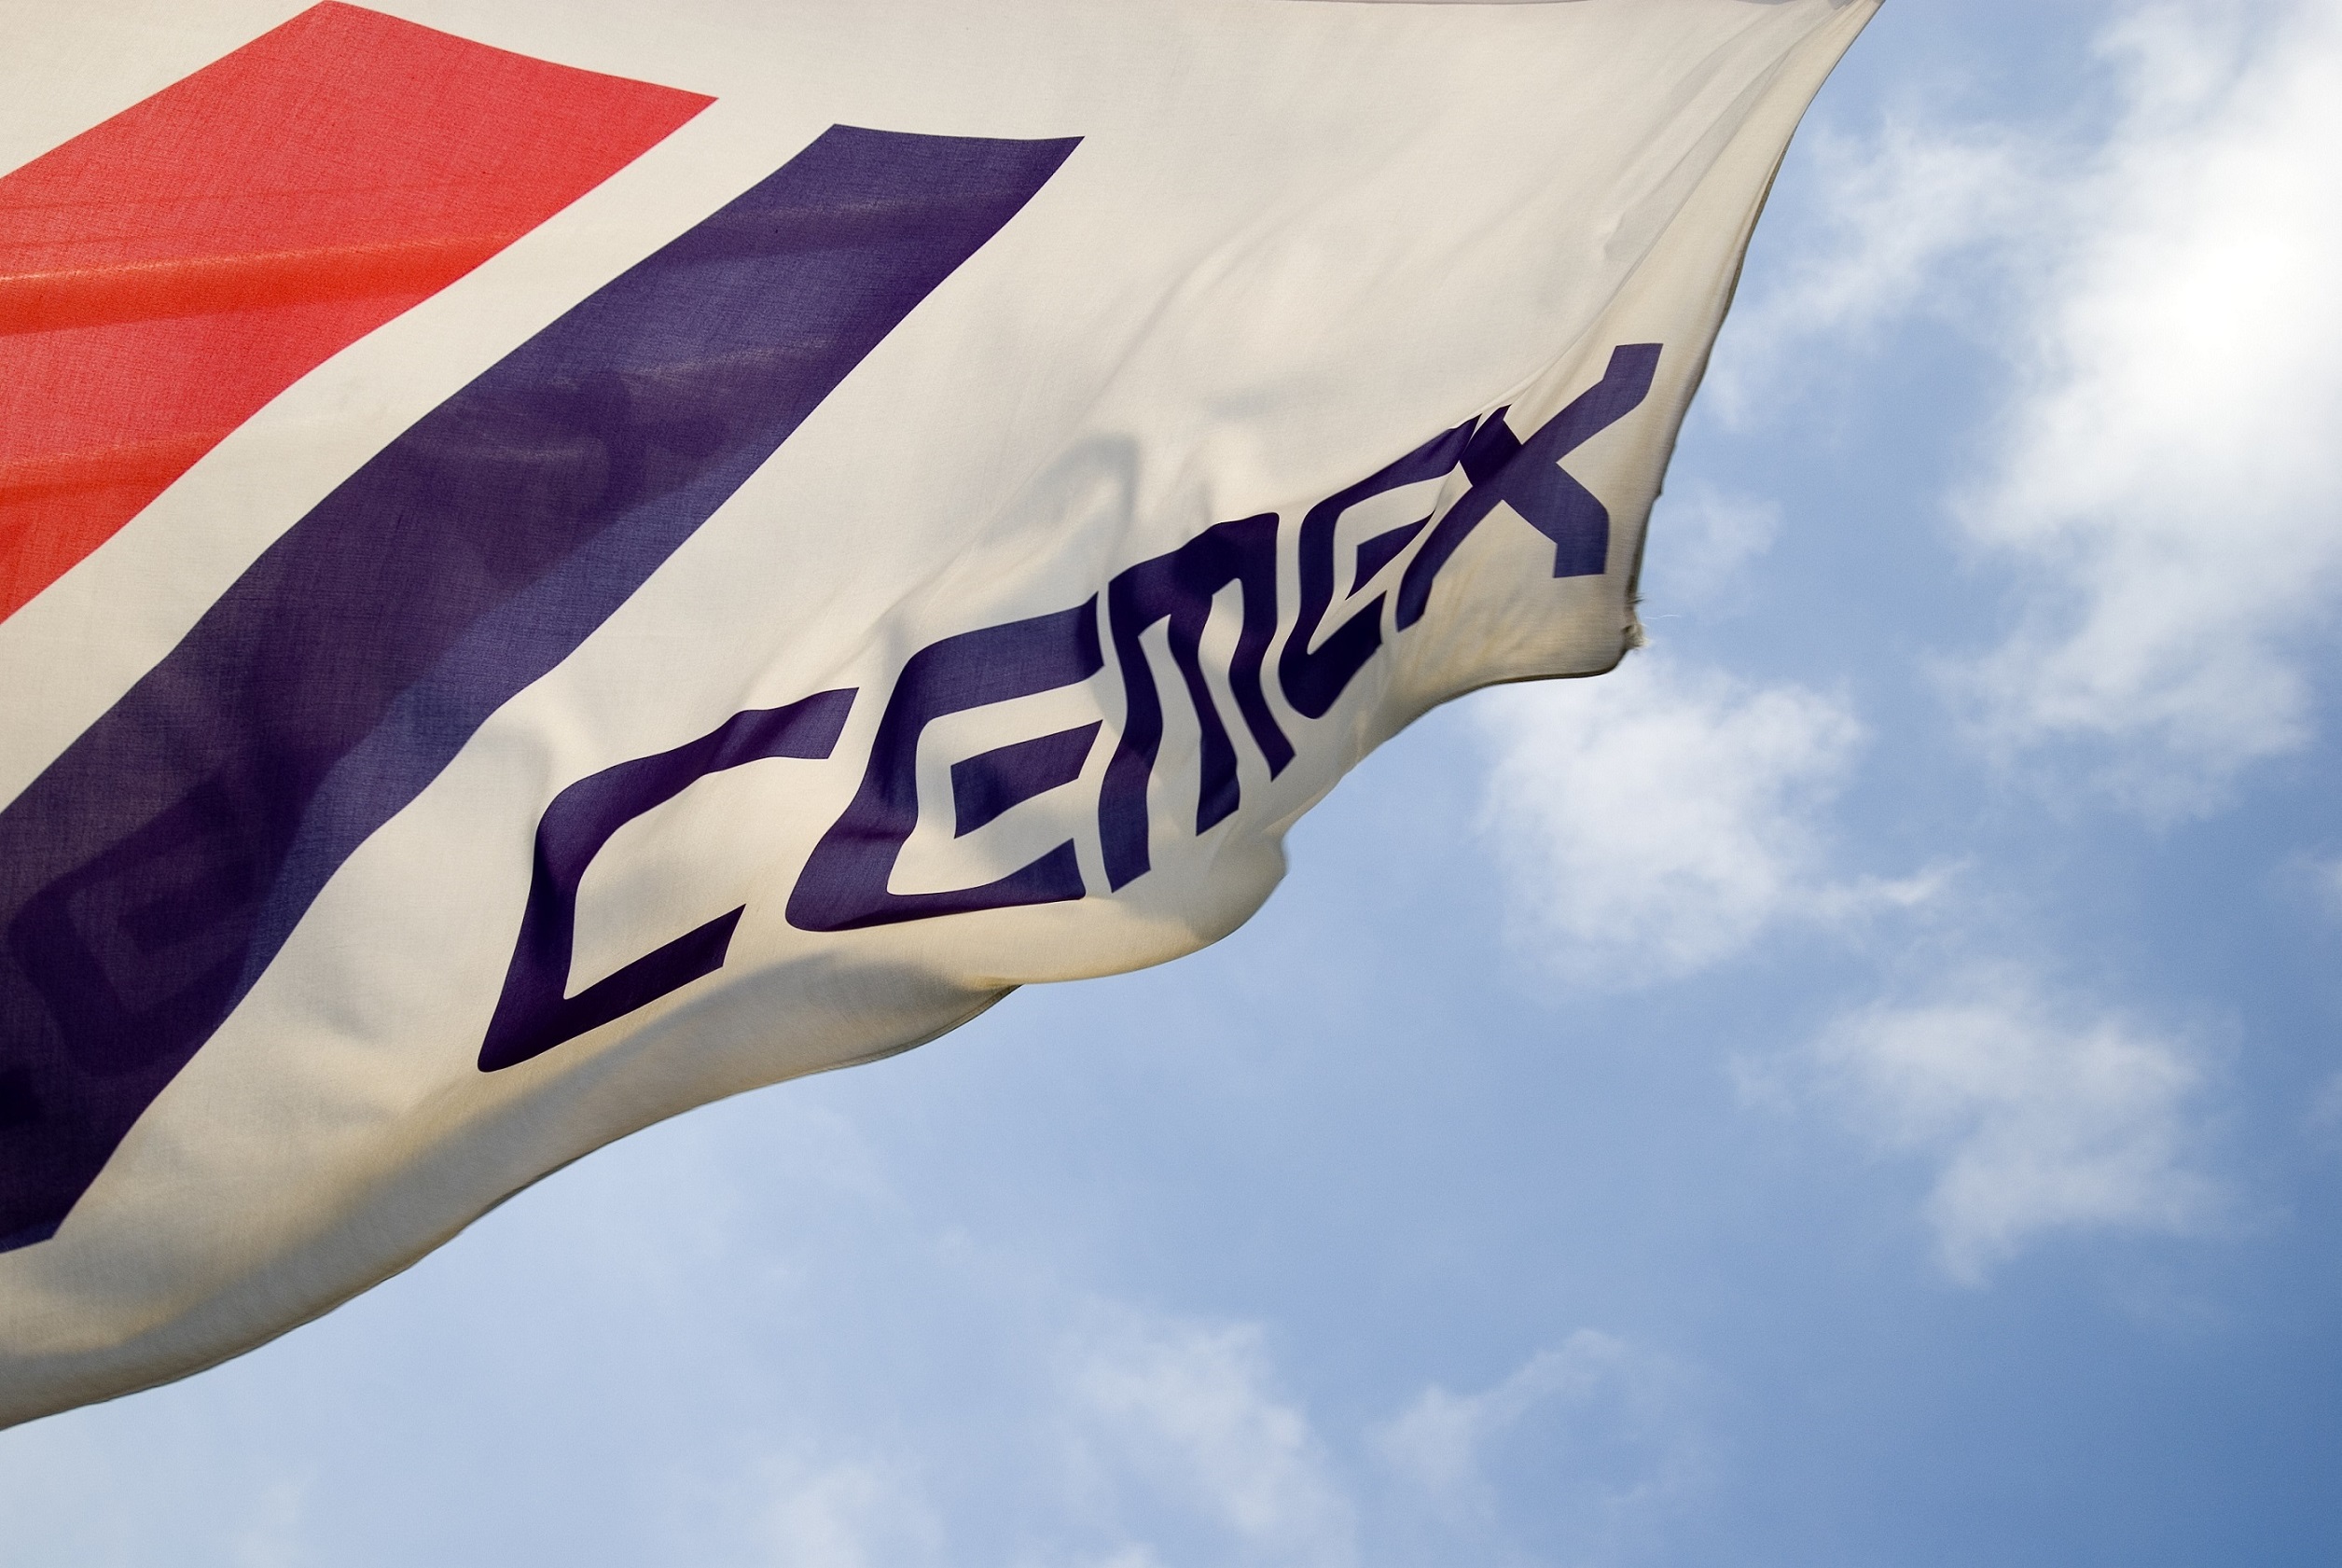 The CO2 for the project will come from CEMEX’s Rüdersdorf cement plant in Germany